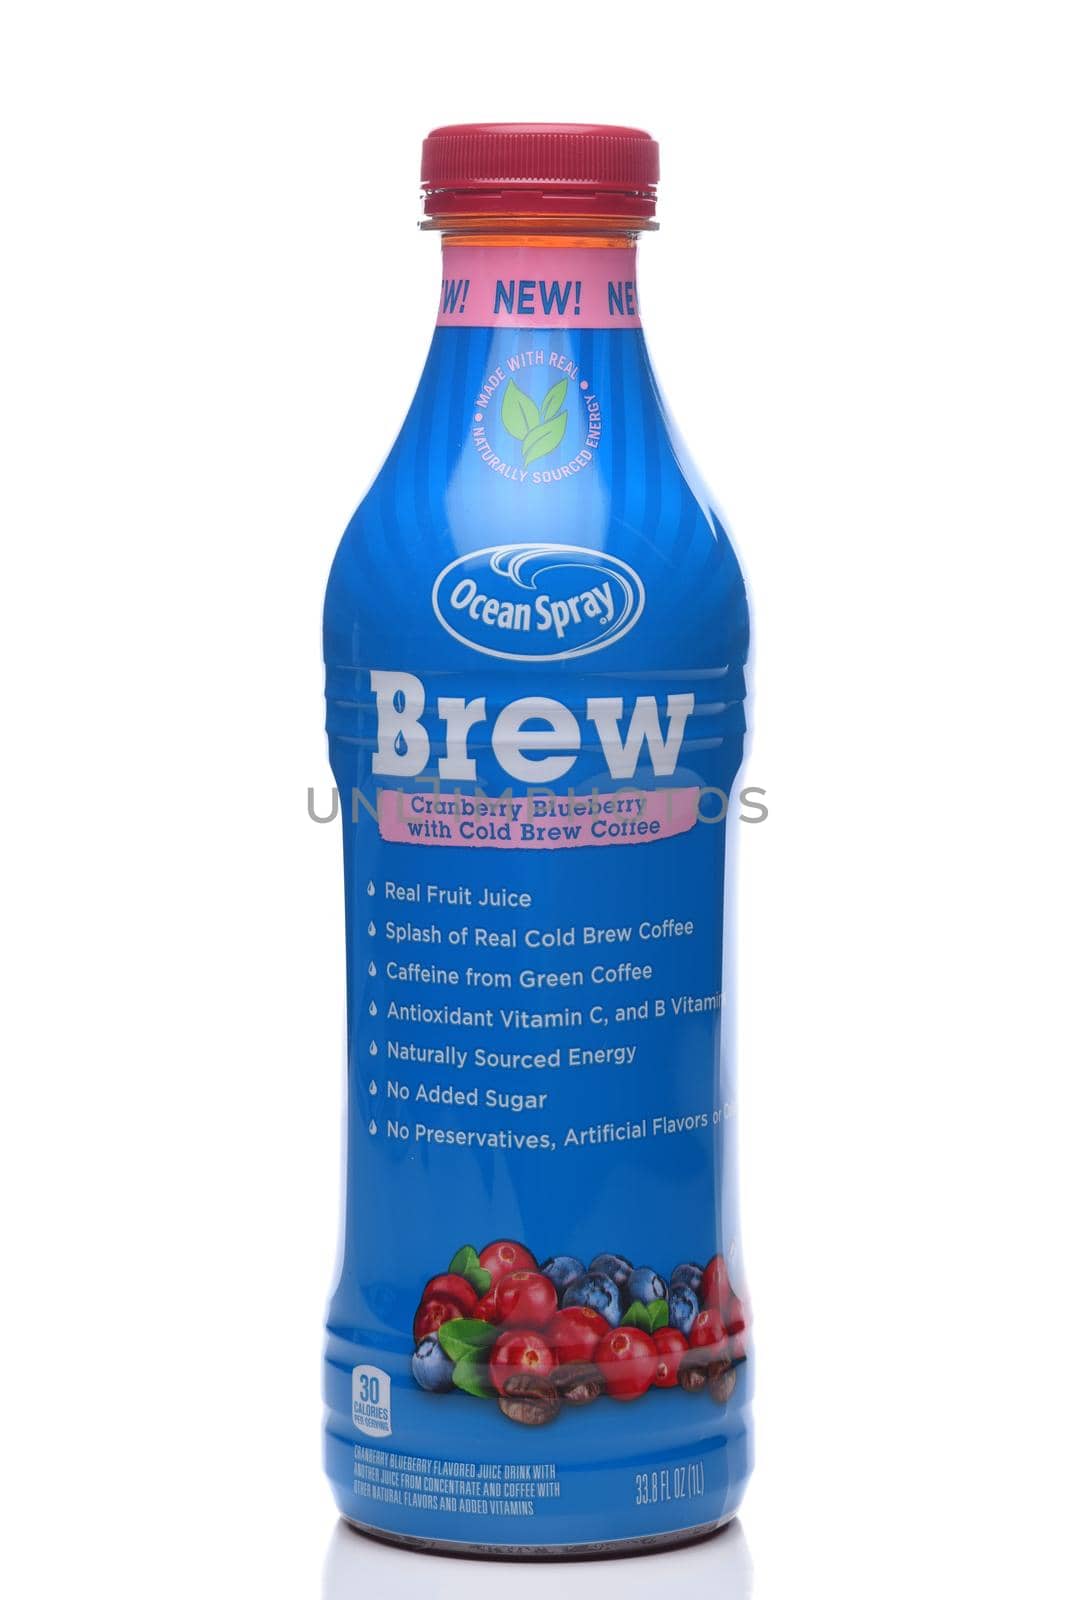 IRVINE, CALIFORNIA - 8 JUNE 2020: A bottle of Ocean Spray Brew, a Cold Brew Coffe with Cranberry and Blueberry flavoring. by sCukrov